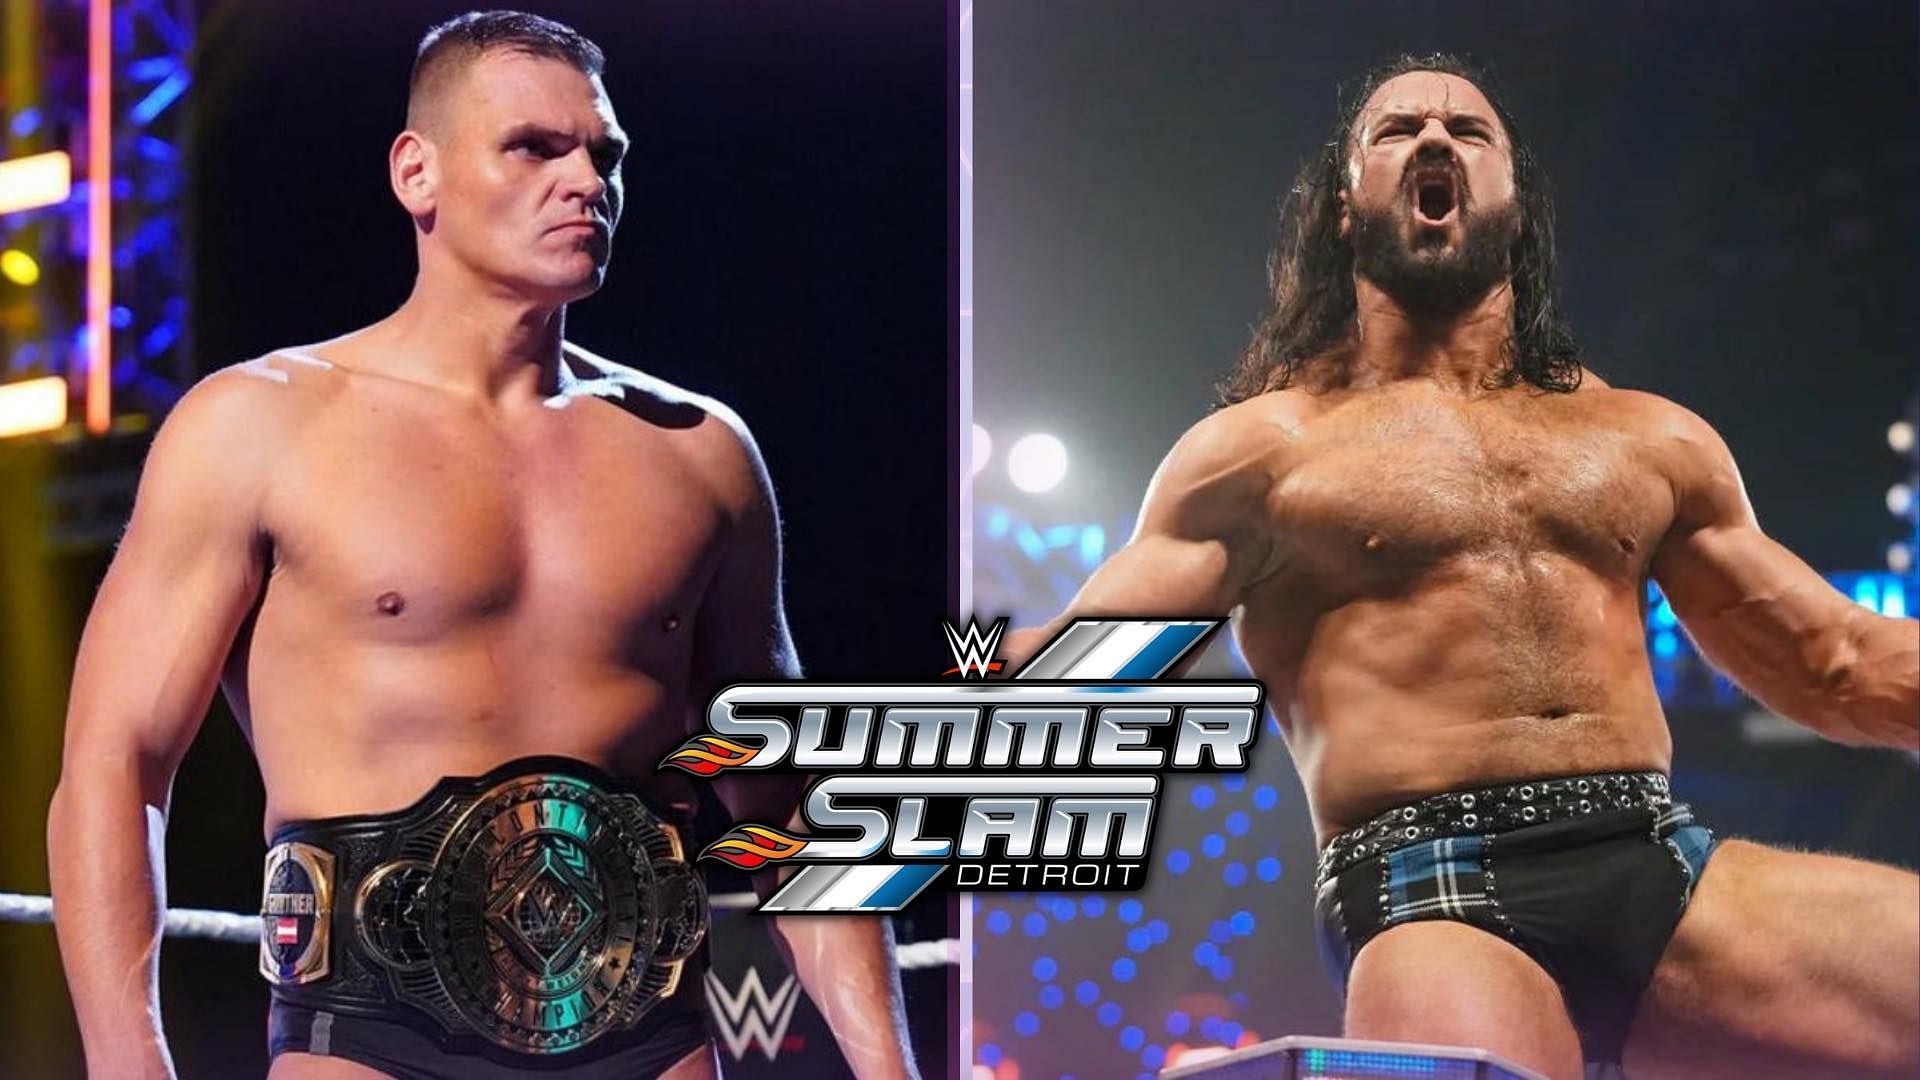 Gunther and Drew McIntyre are set to clash at WWE SummerSlam